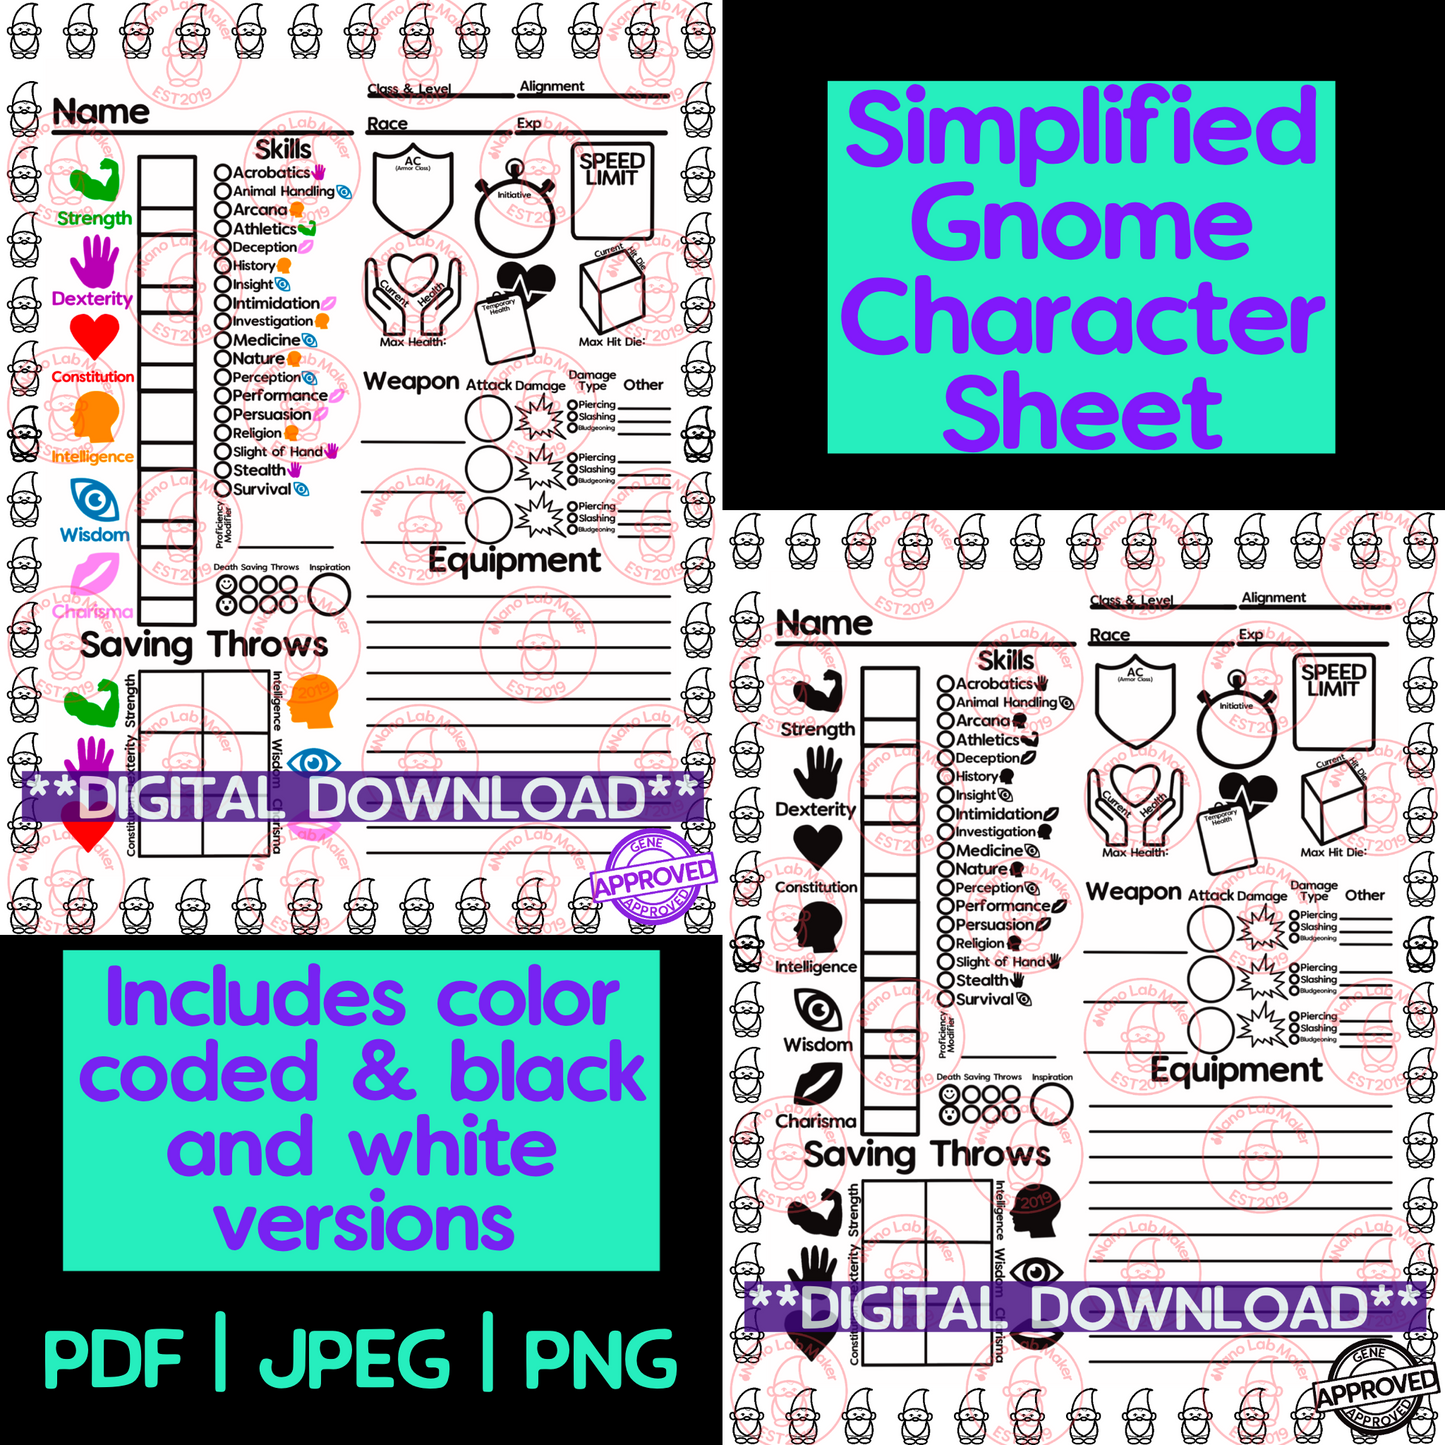 Colorable Gnome Simplified Character Sheet